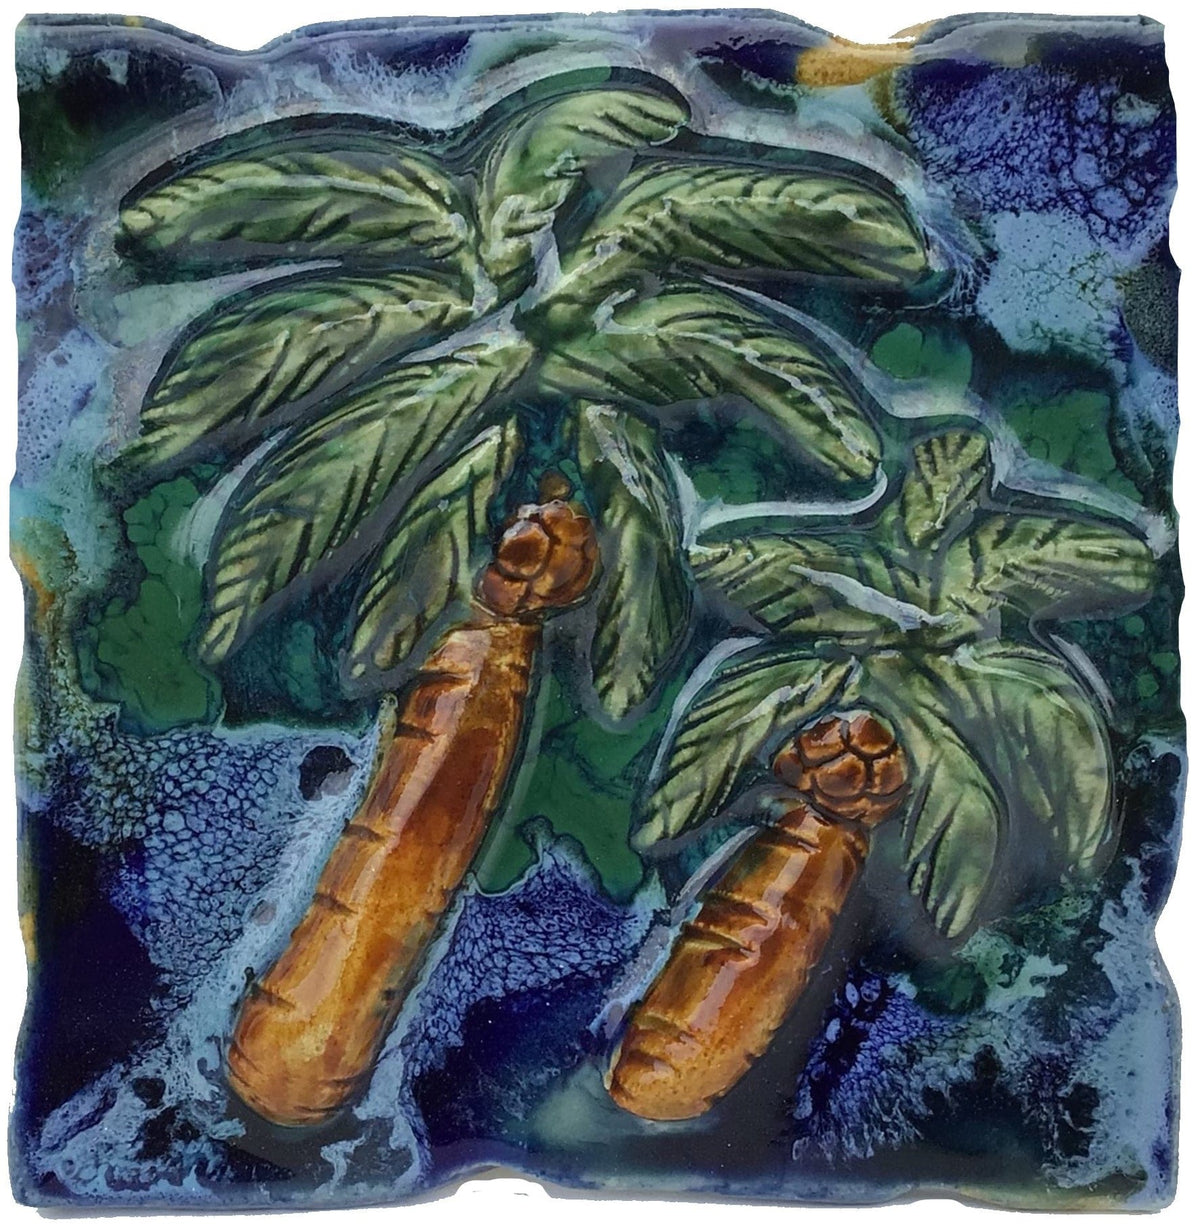 Ceramic Designs by Albert 6x6 Tile Ceramic Palm Trees Wall Hanging, Bathroom Shower Tiles, Kitchen Wall Tile, Sea Side Home Decor